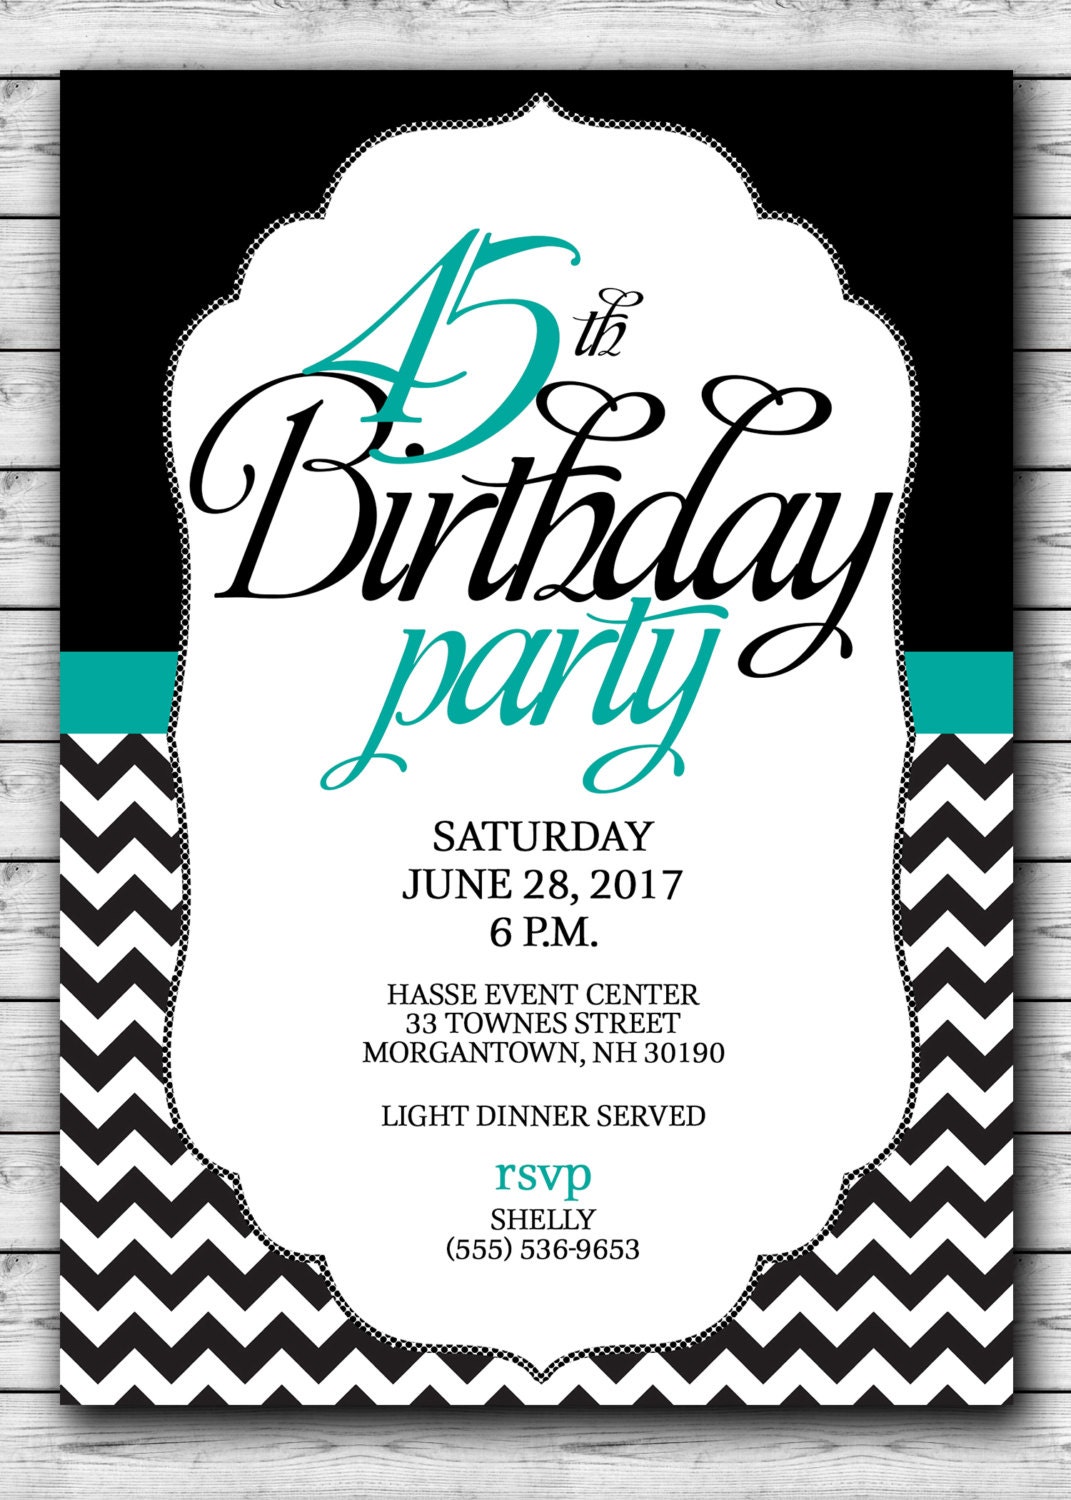 45th-birthday-party-invitation-black-with-a-touch-of-teal-or